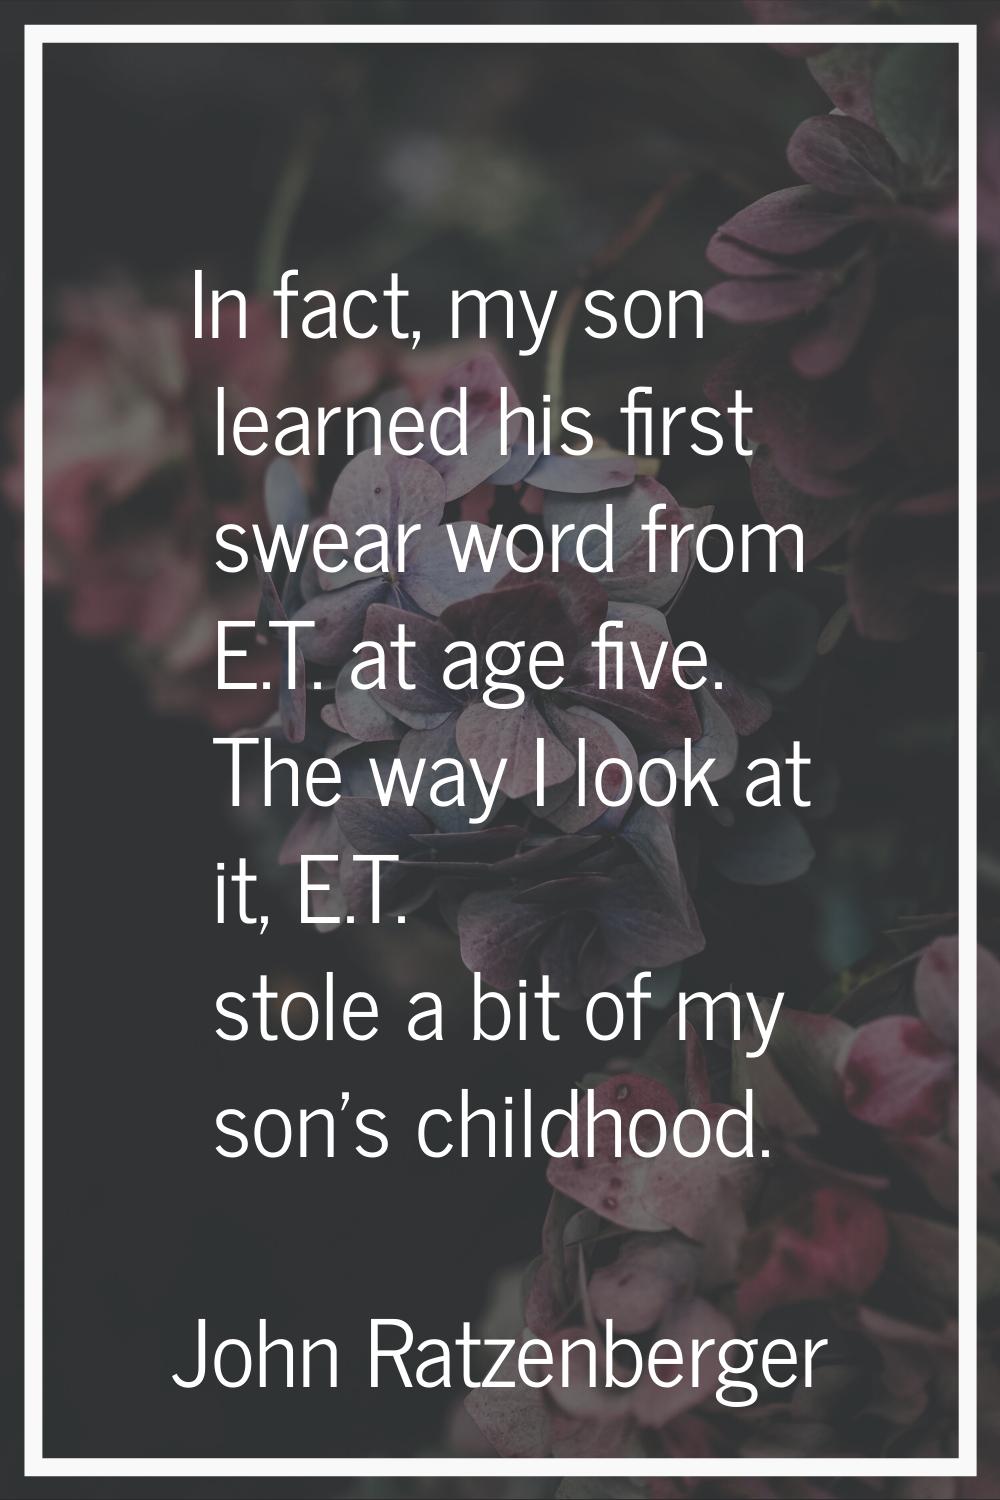 In fact, my son learned his first swear word from E.T. at age five. The way I look at it, E.T. stol